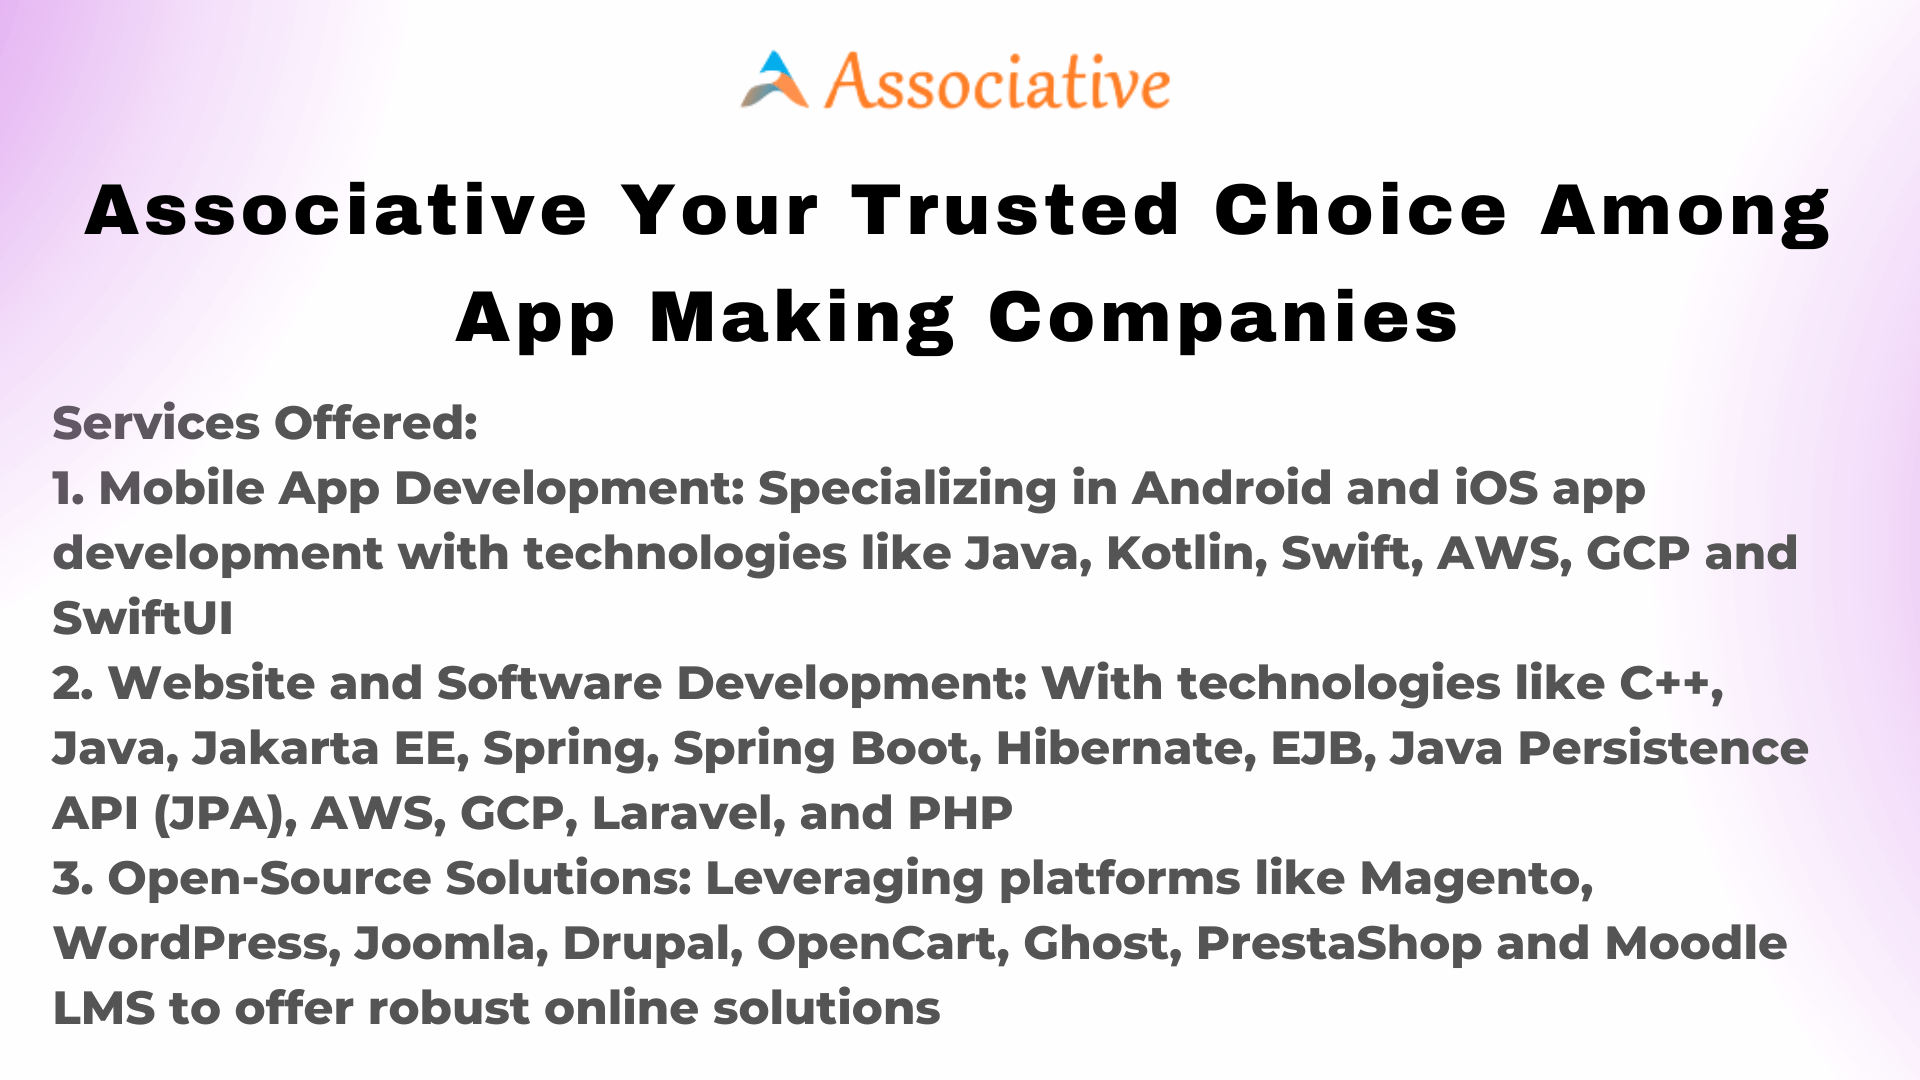 Associative Your Trusted Choice Among App Making Companies